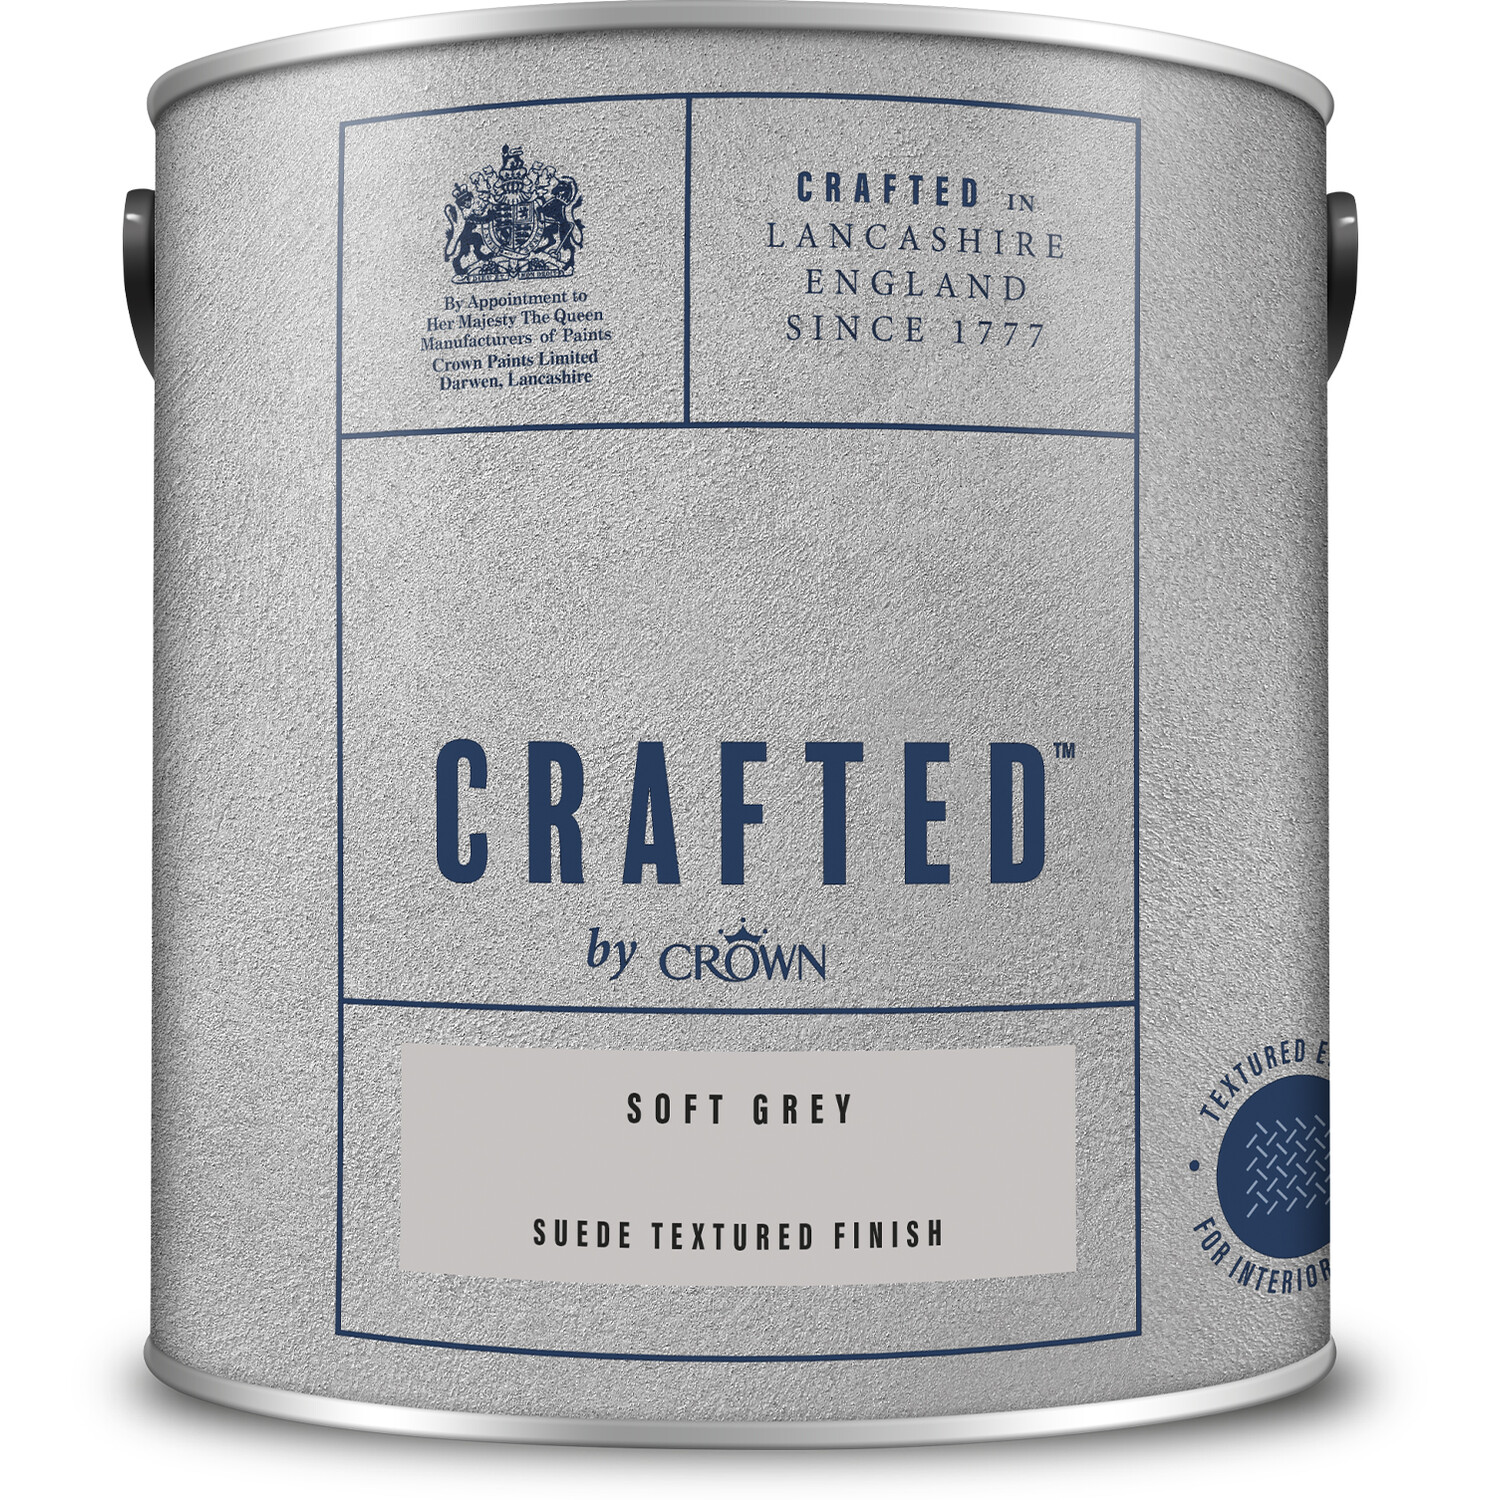 Crown Crafted Walls Soft Grey Suede Textured Finish Paint 2.5L Image 2